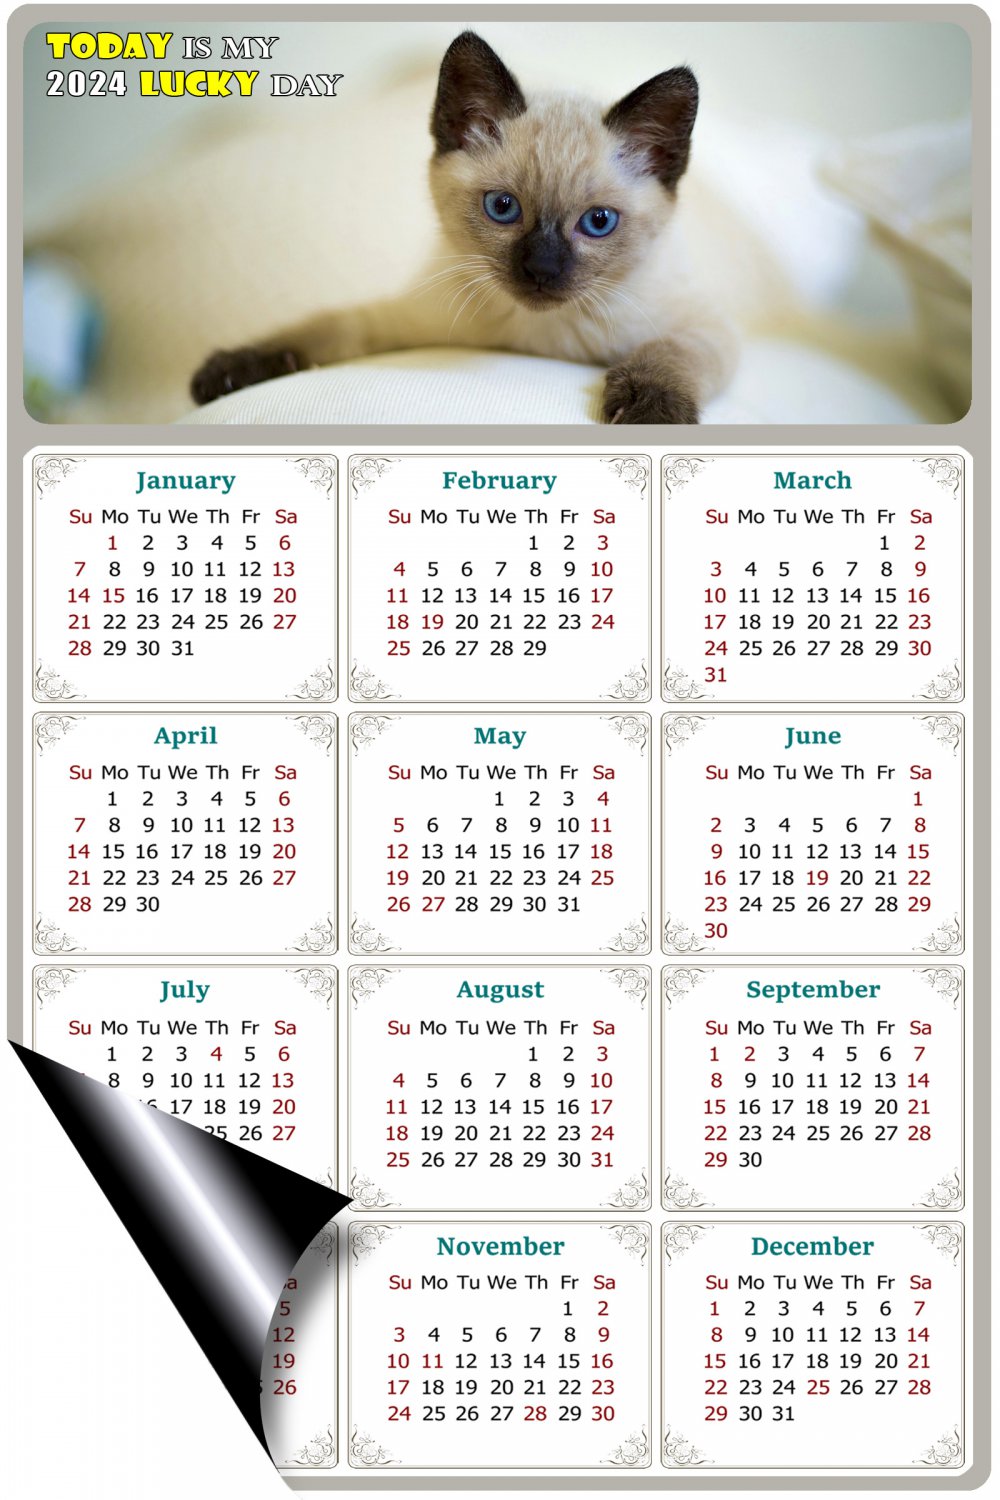 2024 Magnetic Calendar - Calendar Magnets - Today is My Lucky Day - Cat